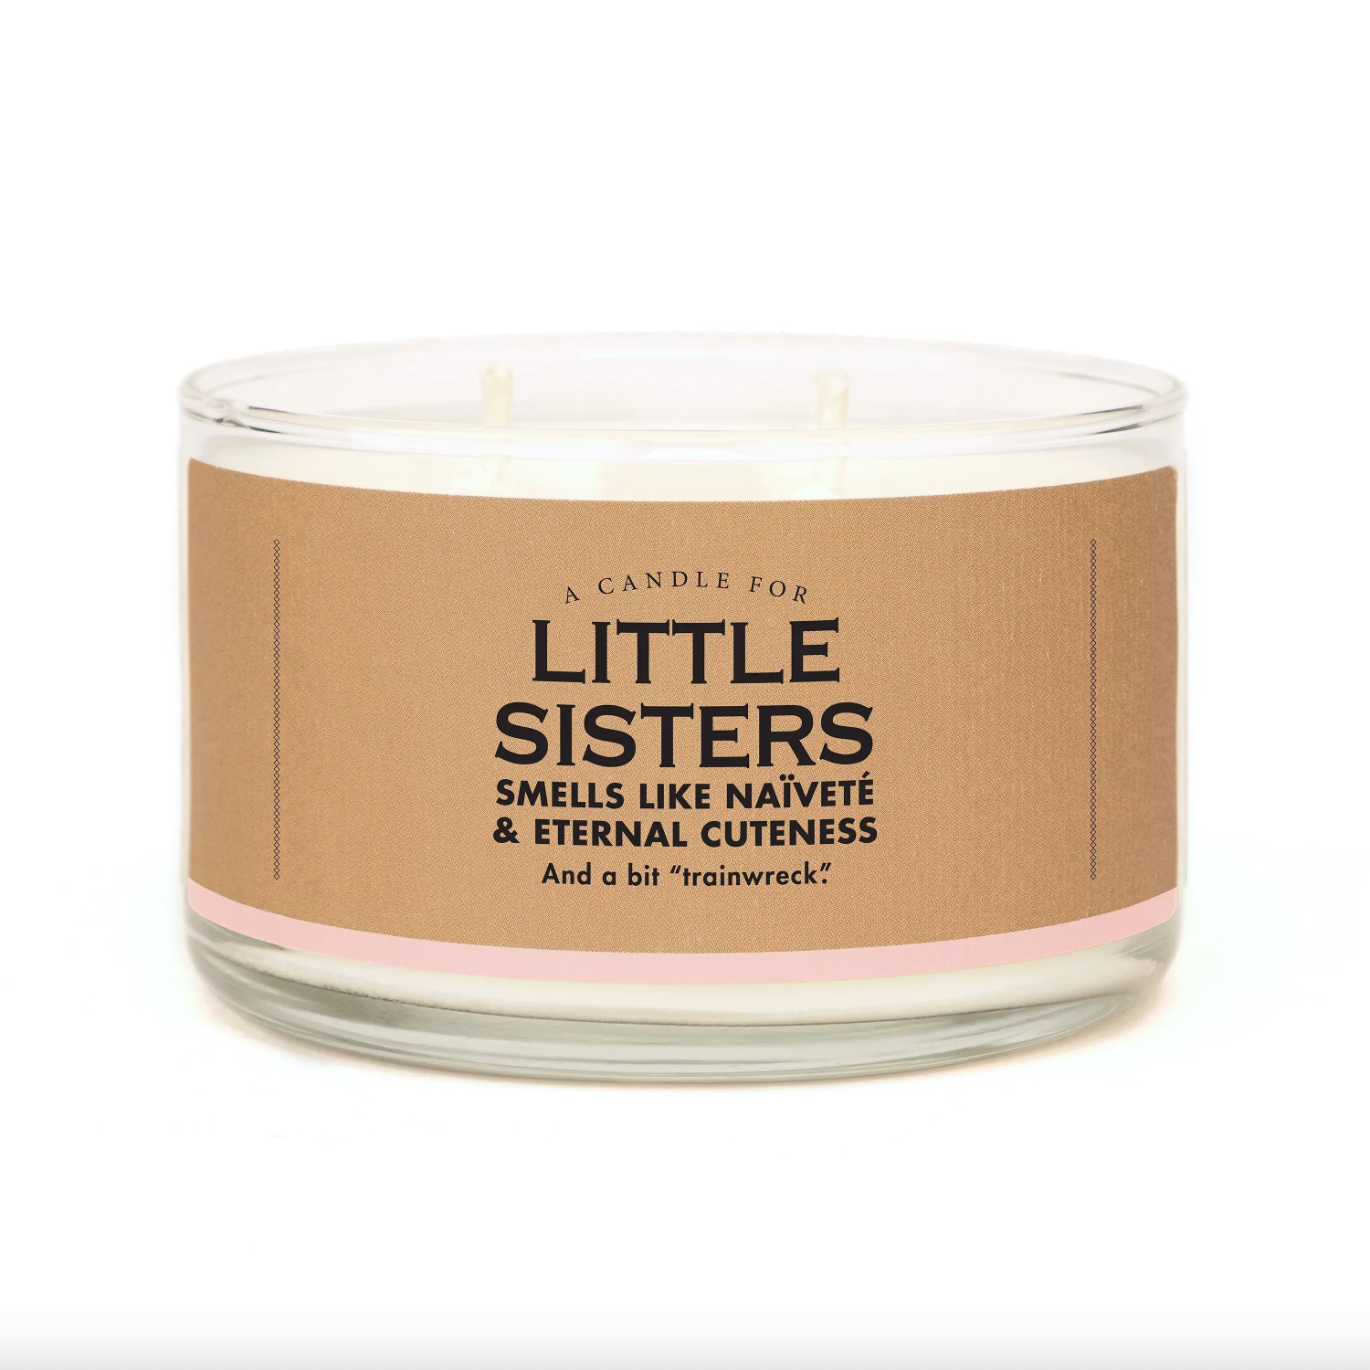 A Candle for Little Sisters - Heart of the Home LV